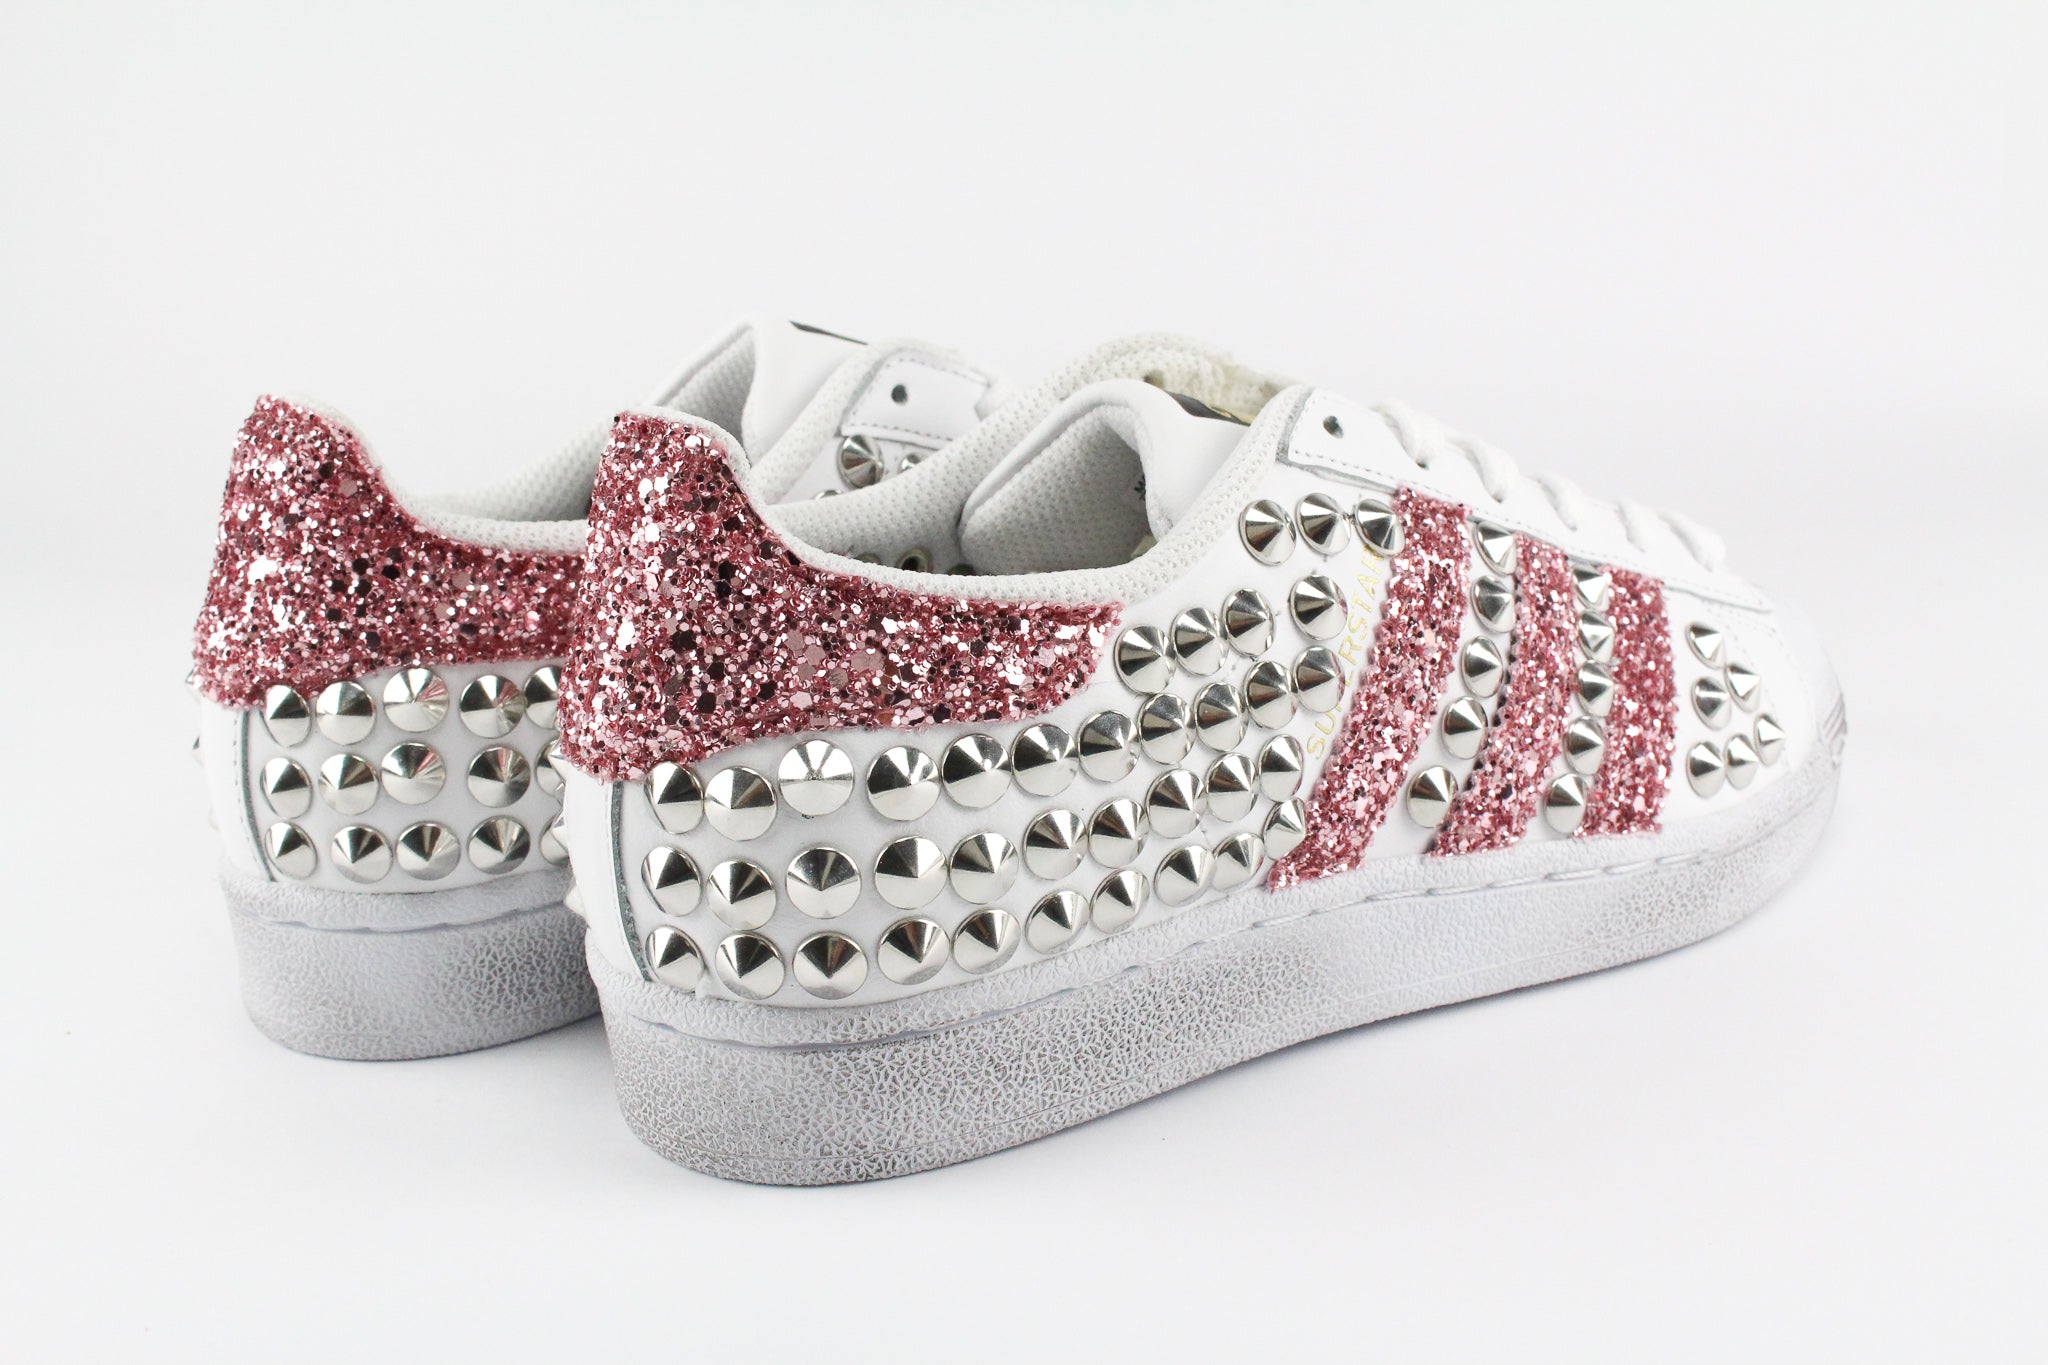 Adidas Superstar Personalizzate Total Borchie & Pink Glitter